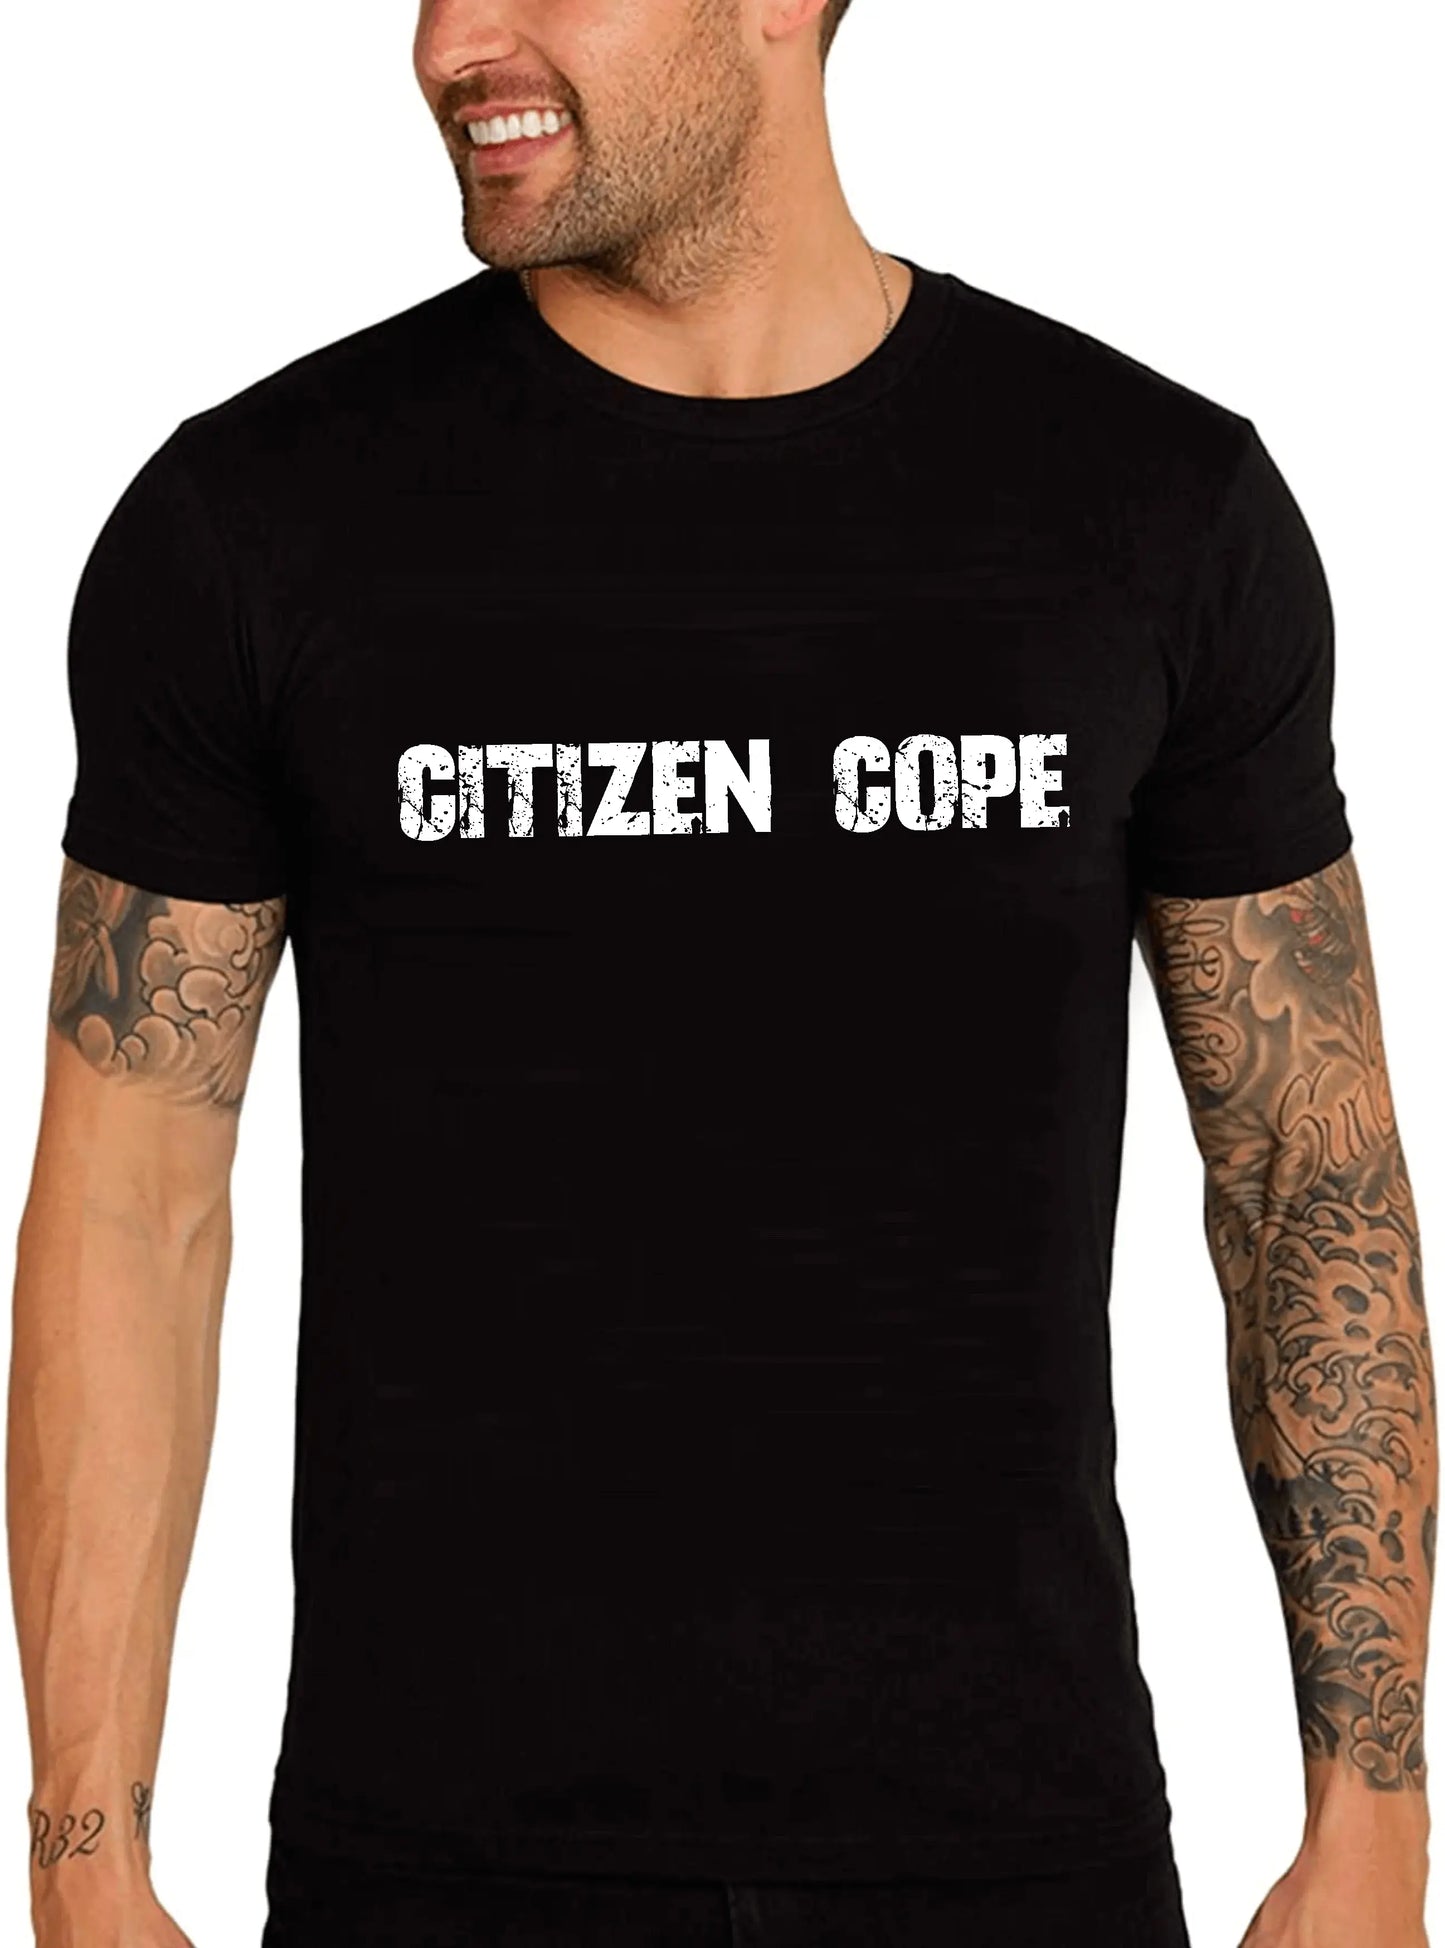 Men's Graphic T-Shirt Citizen Cope Eco-Friendly Limited Edition Short Sleeve Tee-Shirt Vintage Birthday Gift Novelty